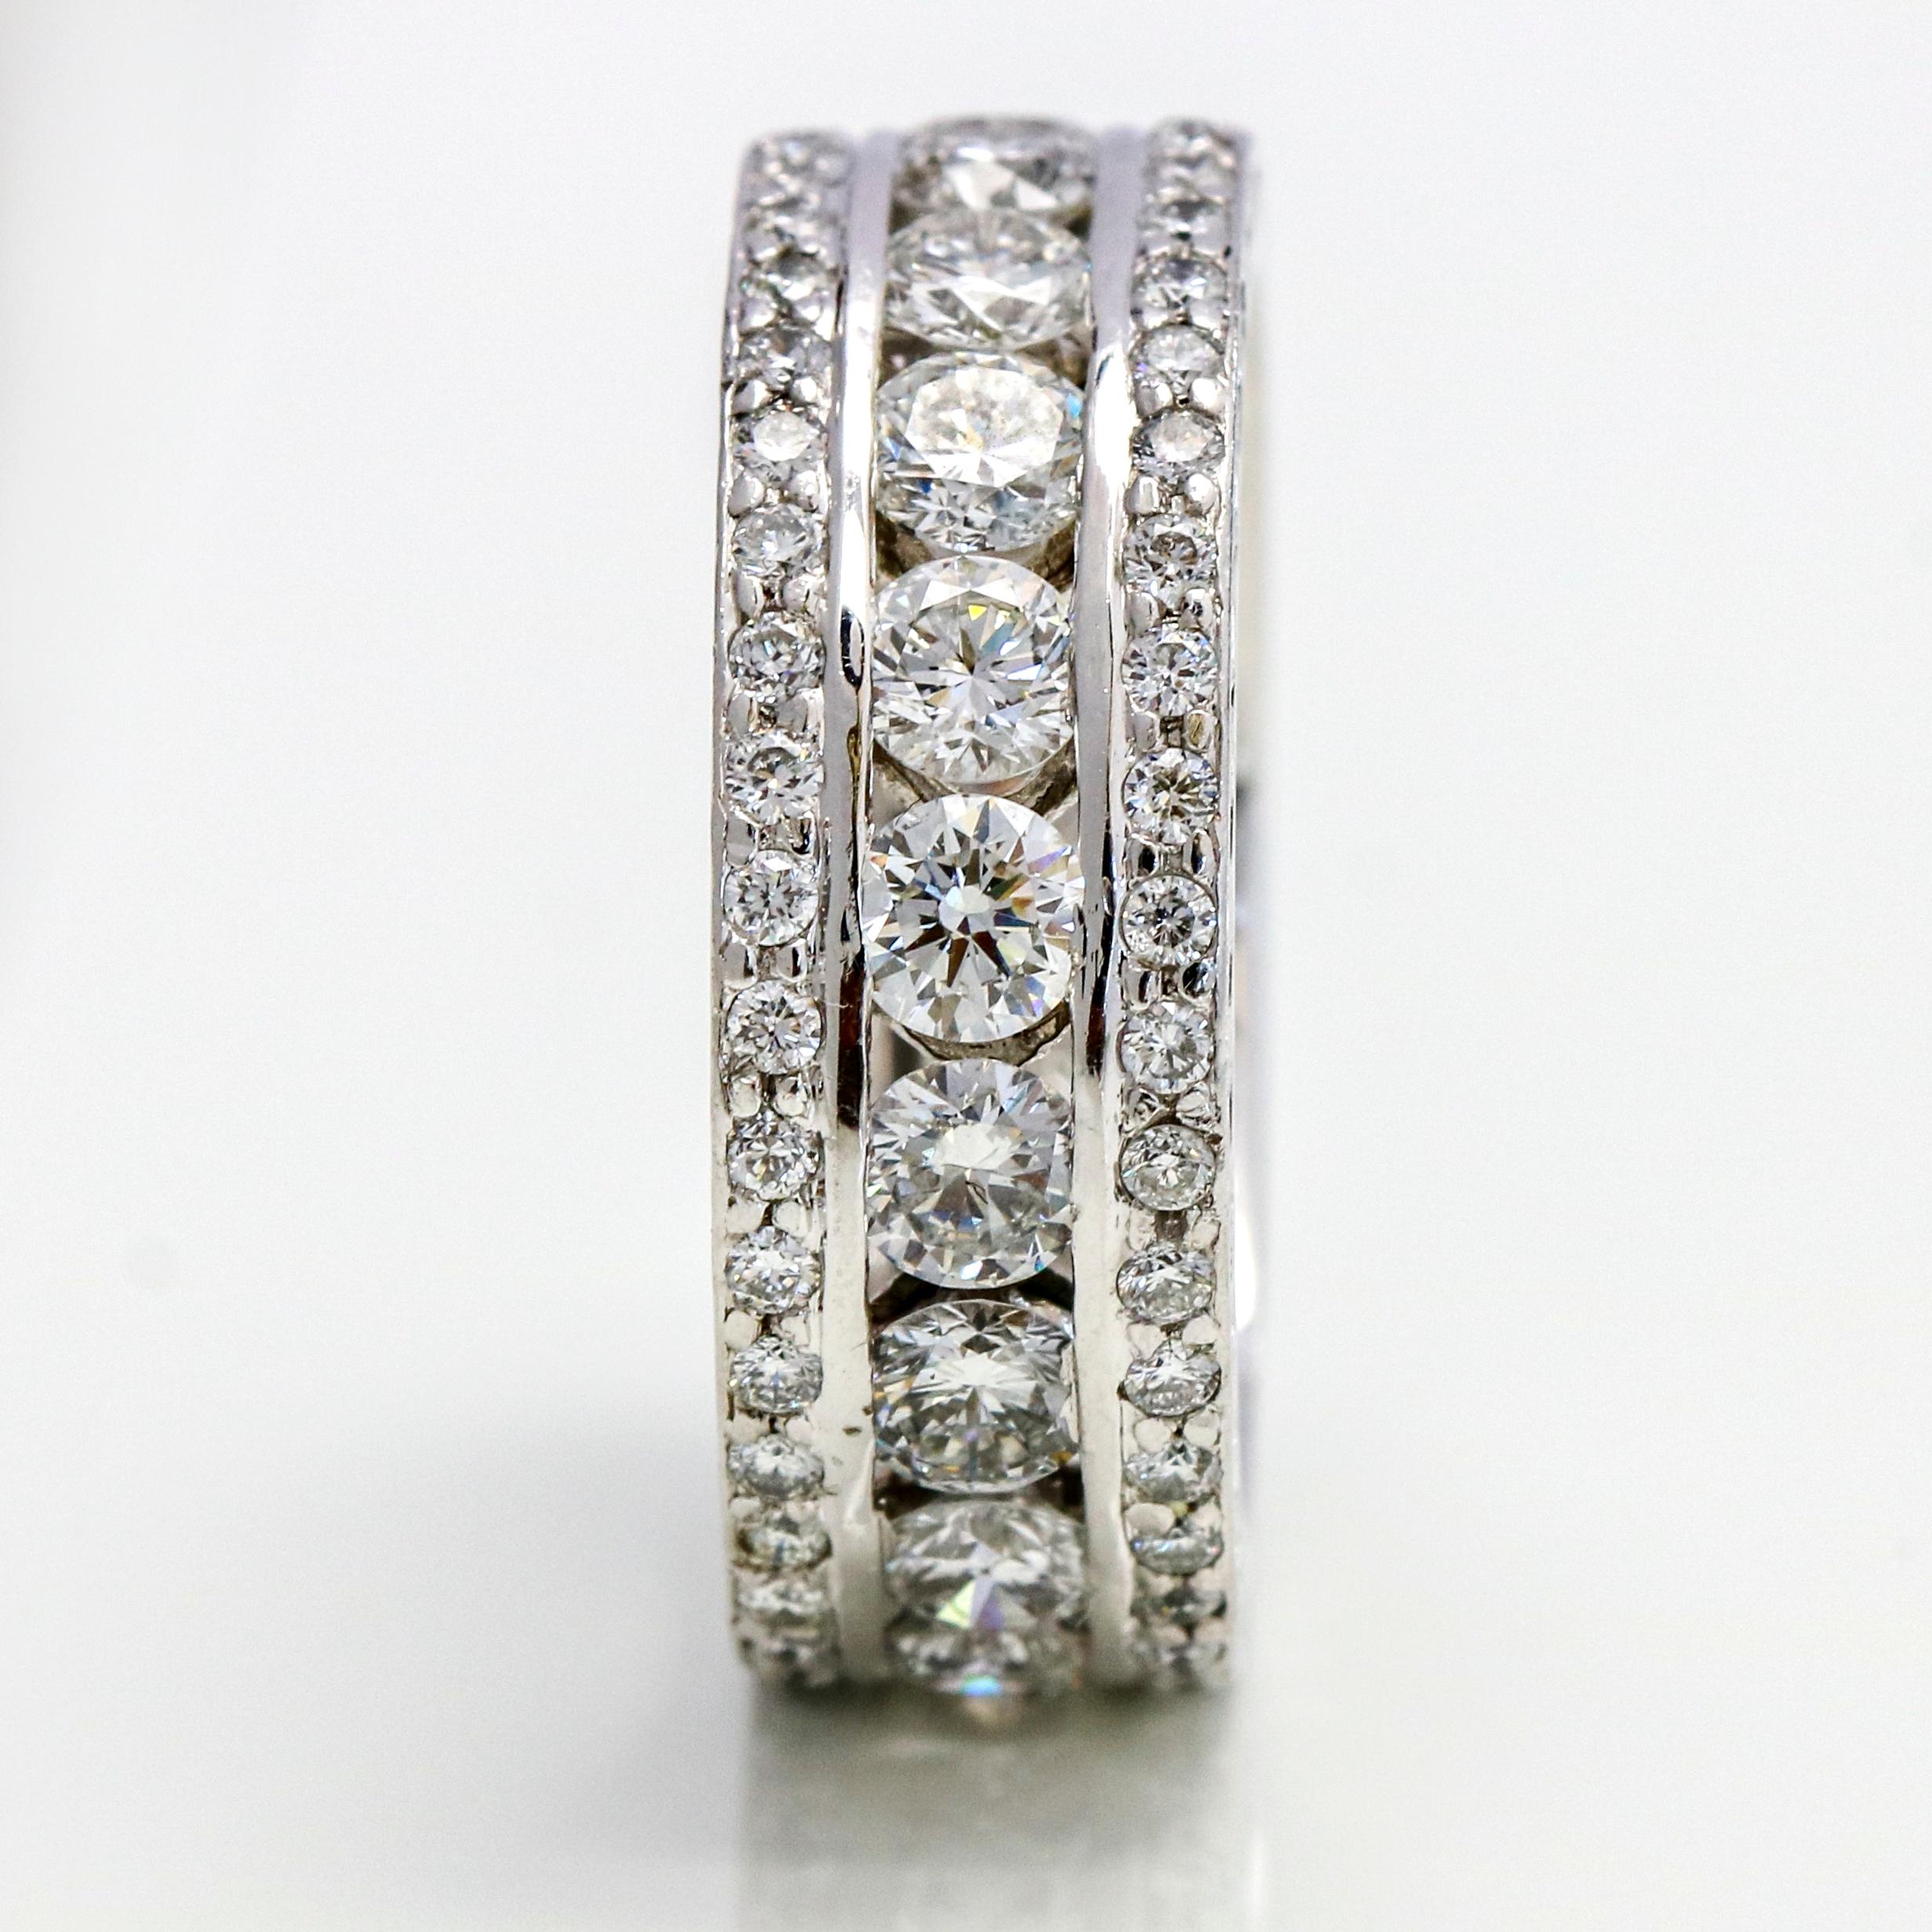 3.39 Carat Platinum Diamond Triple-Row Eternity Band Ring In Good Condition For Sale In Fort Lauderdale, FL